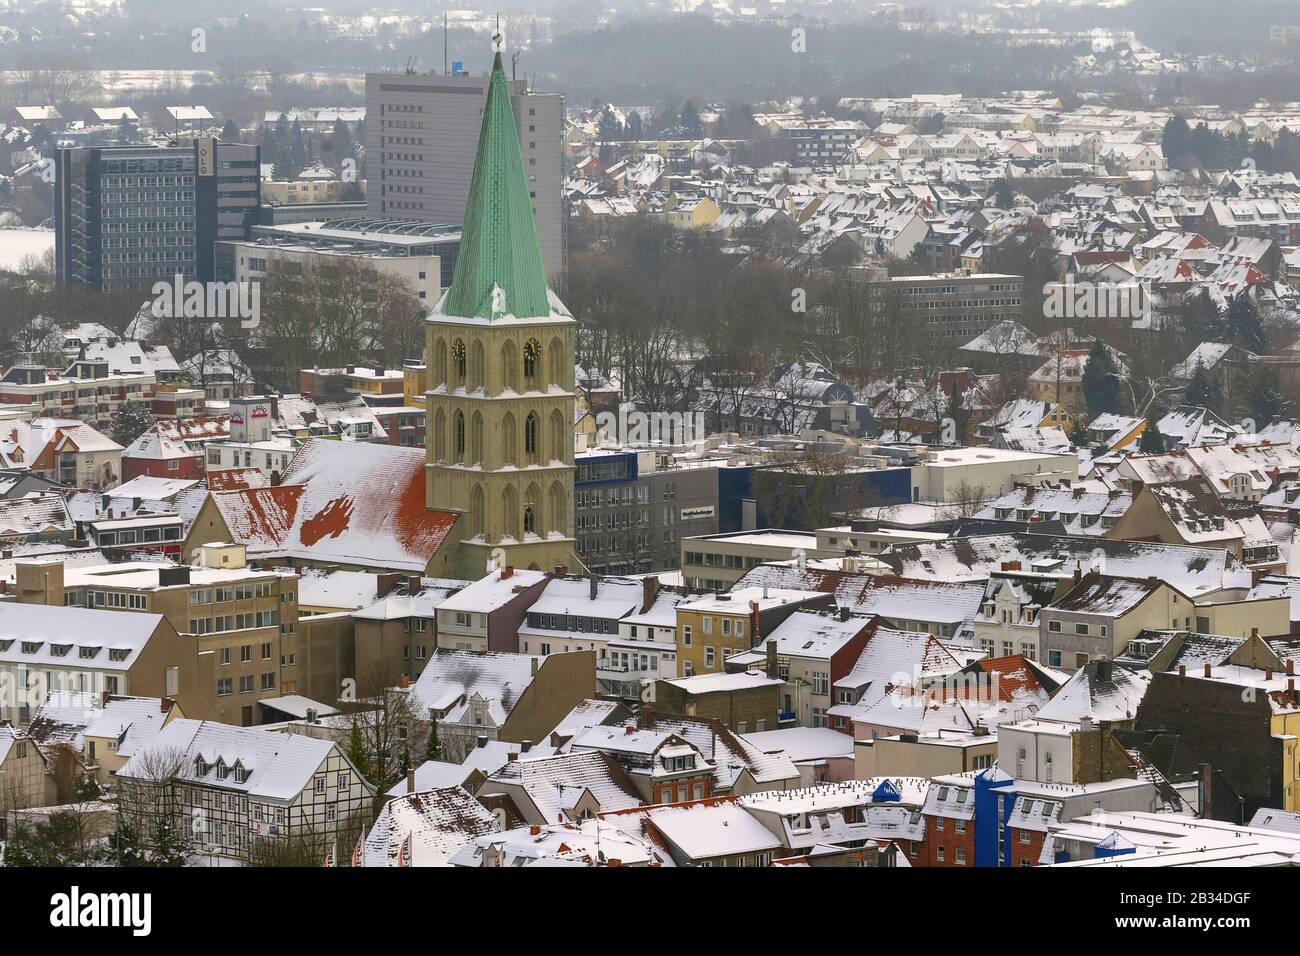 city centre of Hamm with St Paul's Church, 26.01.2013, aerial view, Germany, North Rhine-Westphalia, Ruhr Area, Hamm Stock Photo